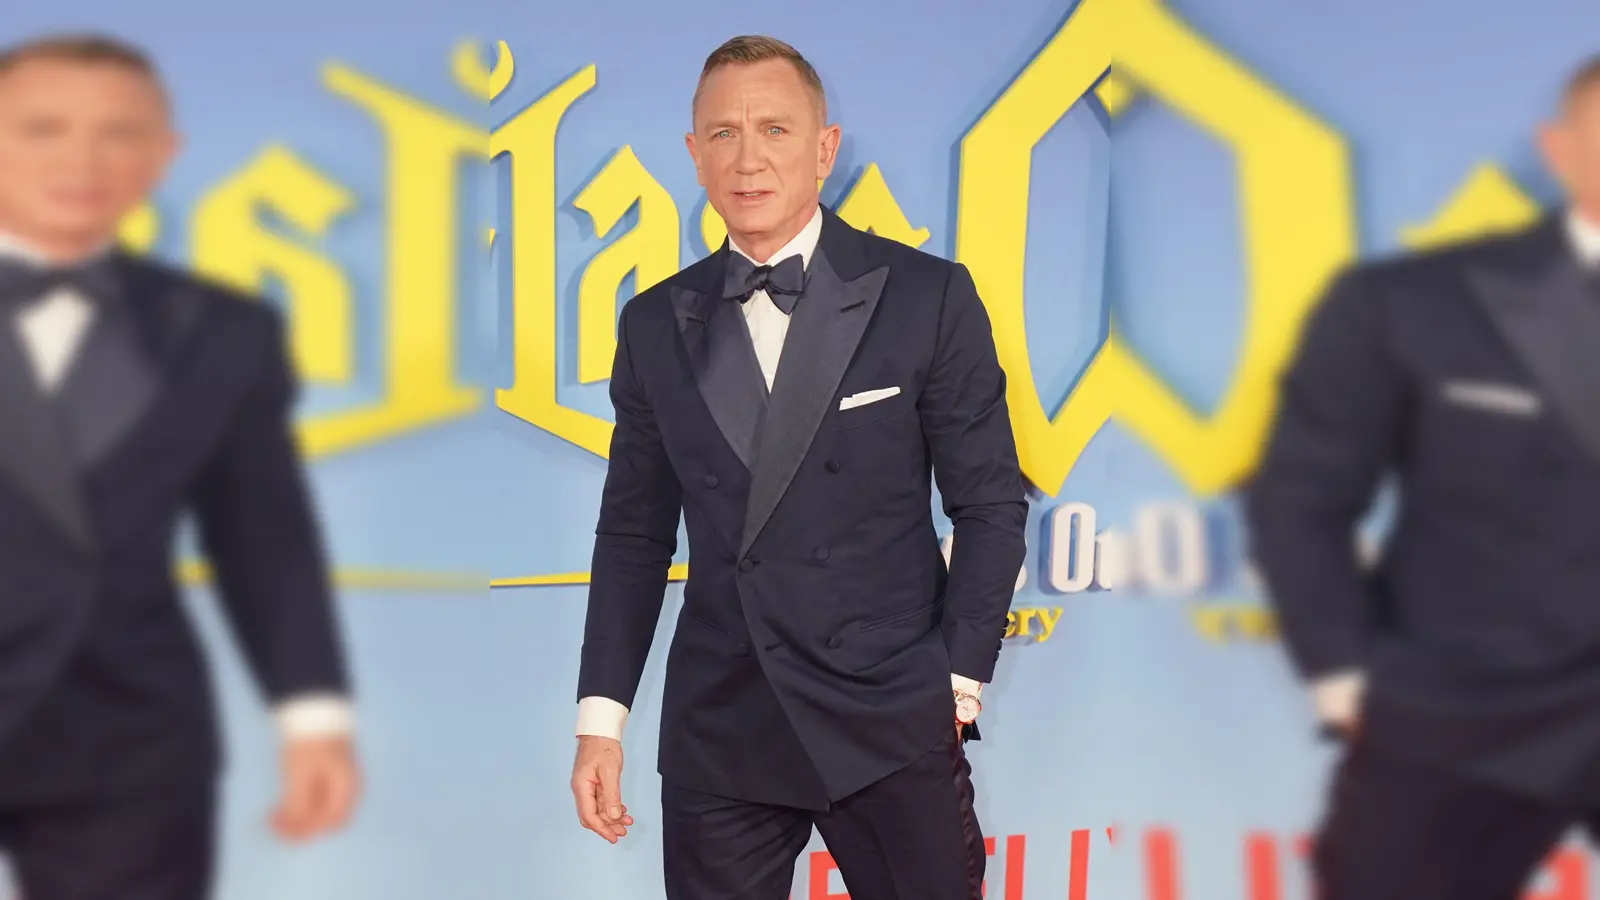 Daniel Craig bei der Europapremiere des Films „Glass Onion: A Knives Out Mystery“ in London. (Foto: James Manning/PA Wire/dpa)